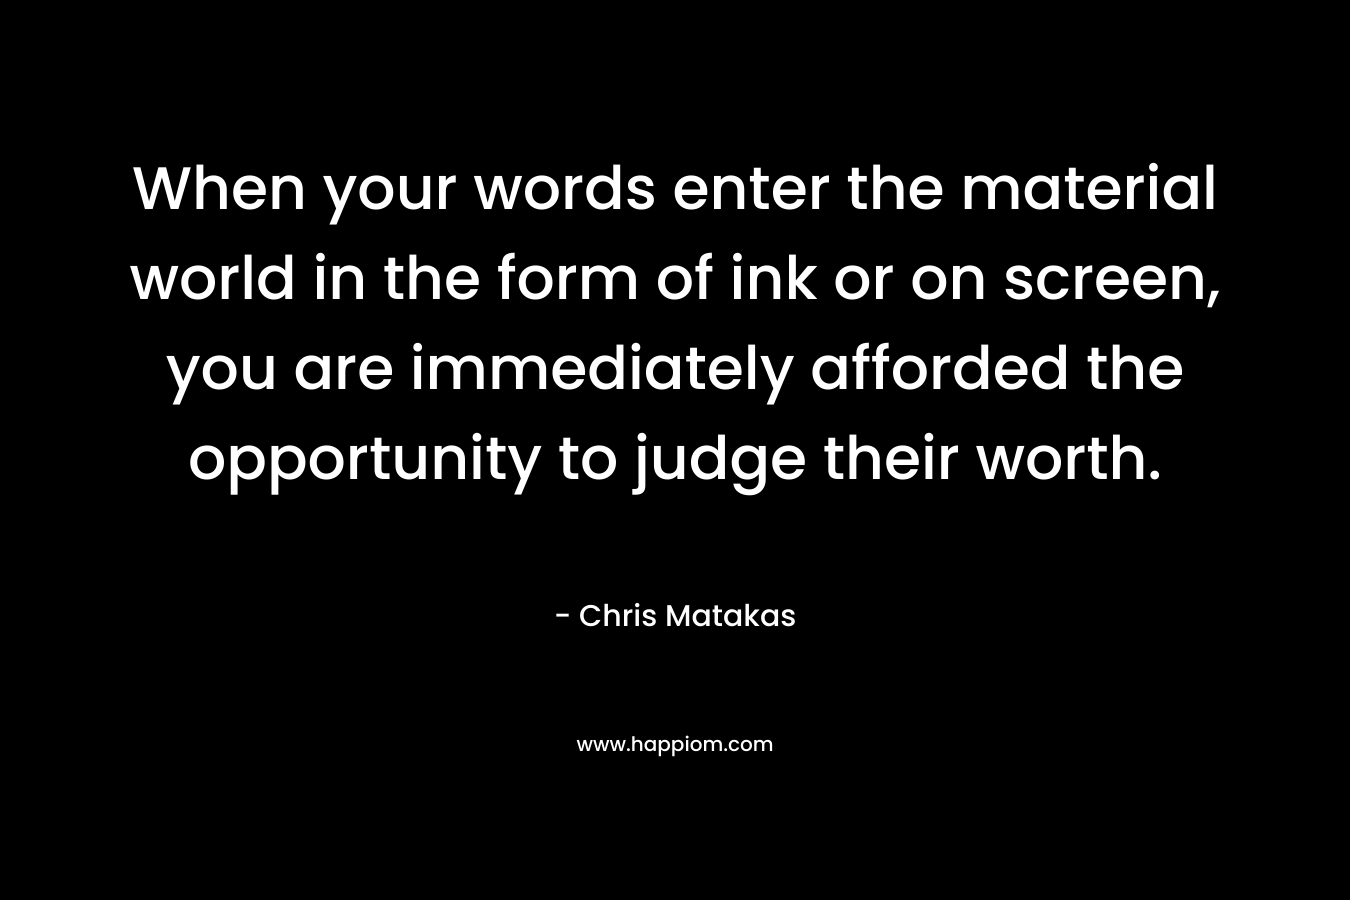 When your words enter the material world in the form of ink or on screen, you are immediately afforded the opportunity to judge their worth.